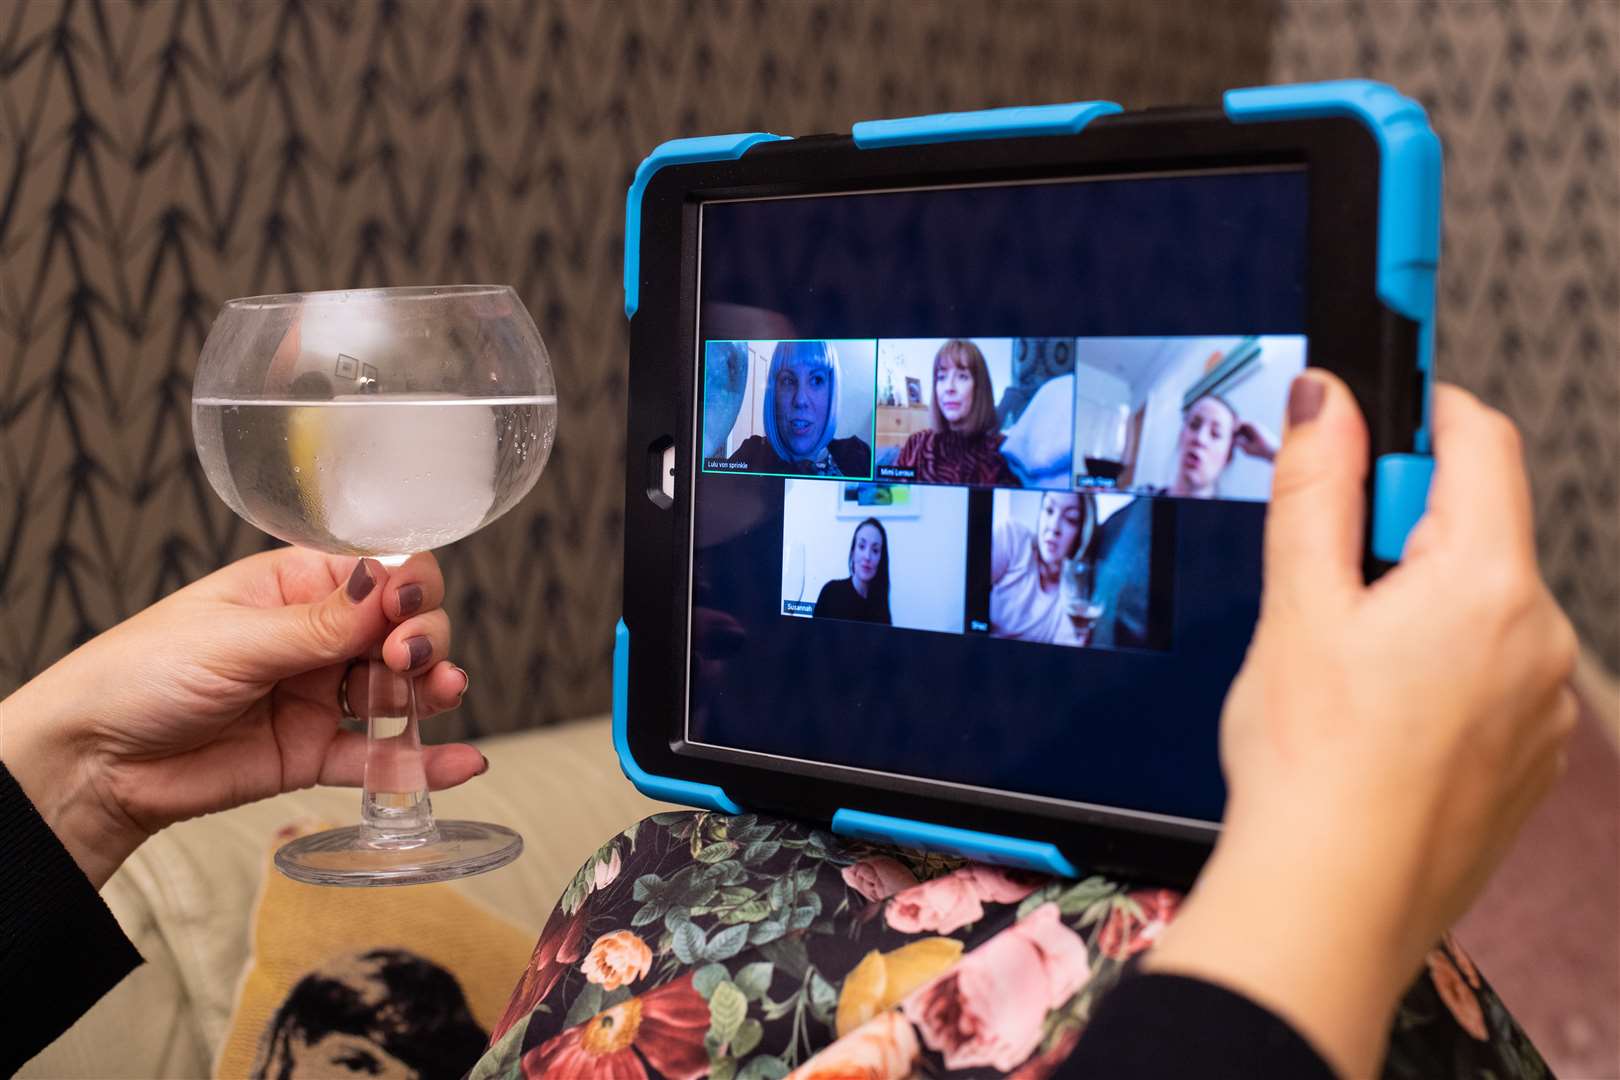 A group of women use the Zoom video conferencing application to have a group chat from their separate homes, during the UK coronavirus lockdown (Dominic Lipinski/PA)